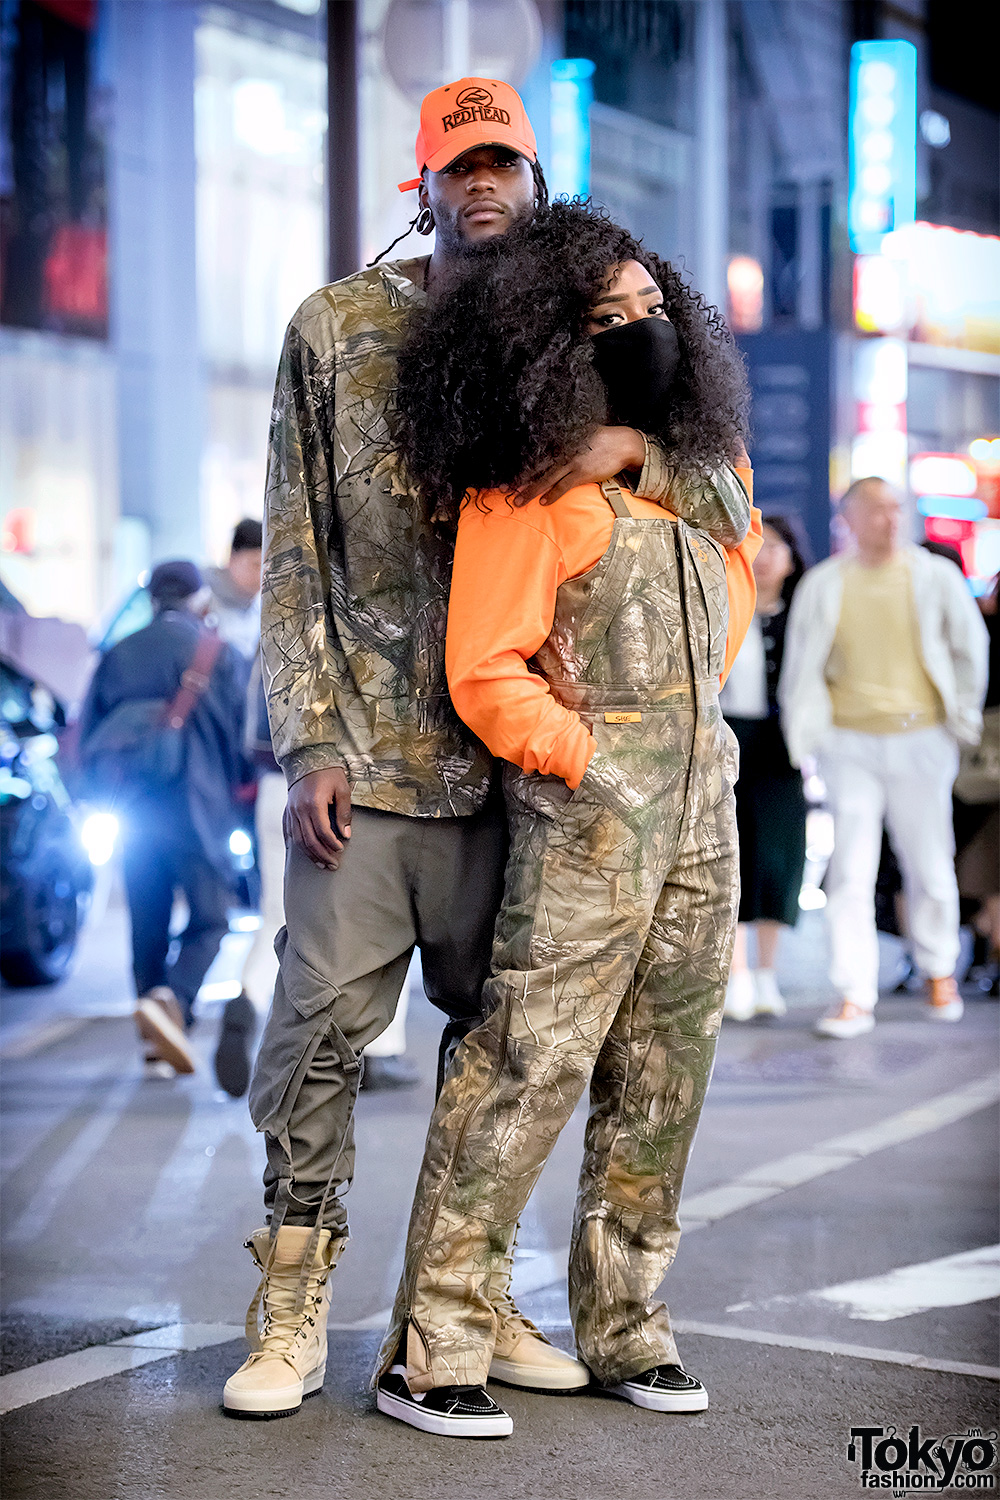 Harajuku Duo in Hunting Gear Street Styles w/ She Camouflage, Redhead Cap & Vans